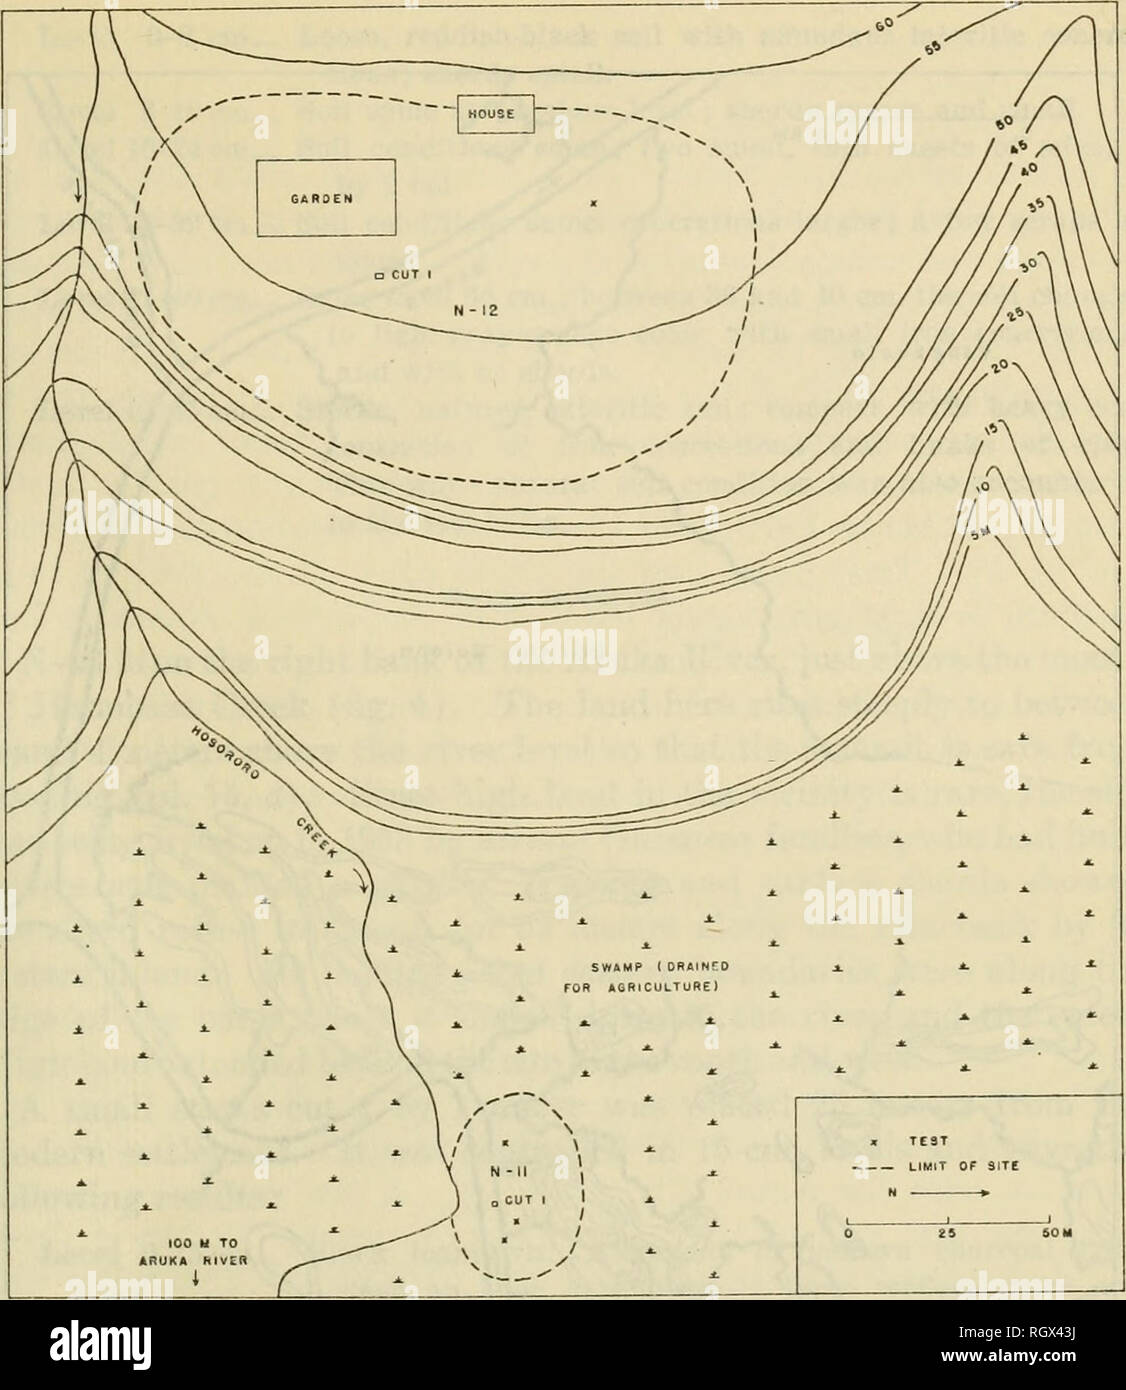 . Bulletin. Ethnology. Evans and Meggers] ARCHEOLOGY IN BRITISH GXHANA 69. Figure 21.—Sketch map showing the location of N-11: Hosororo Creek, a shell midden of the Alaka Phase, and N-12: Hosororo Hill, a habitation site of the Mabaruma Phase. majority of trees, leaving a few for shade. Sherds were visible in the cultivated garden and in paths leading down the hillside. Tests in the intervening and surrounding area indicated that a former habitation site occupied the major part of the shelf, extending over an approximately oval area 160 meters in a nortli-south direction by 95 meters east-west Stock Photo